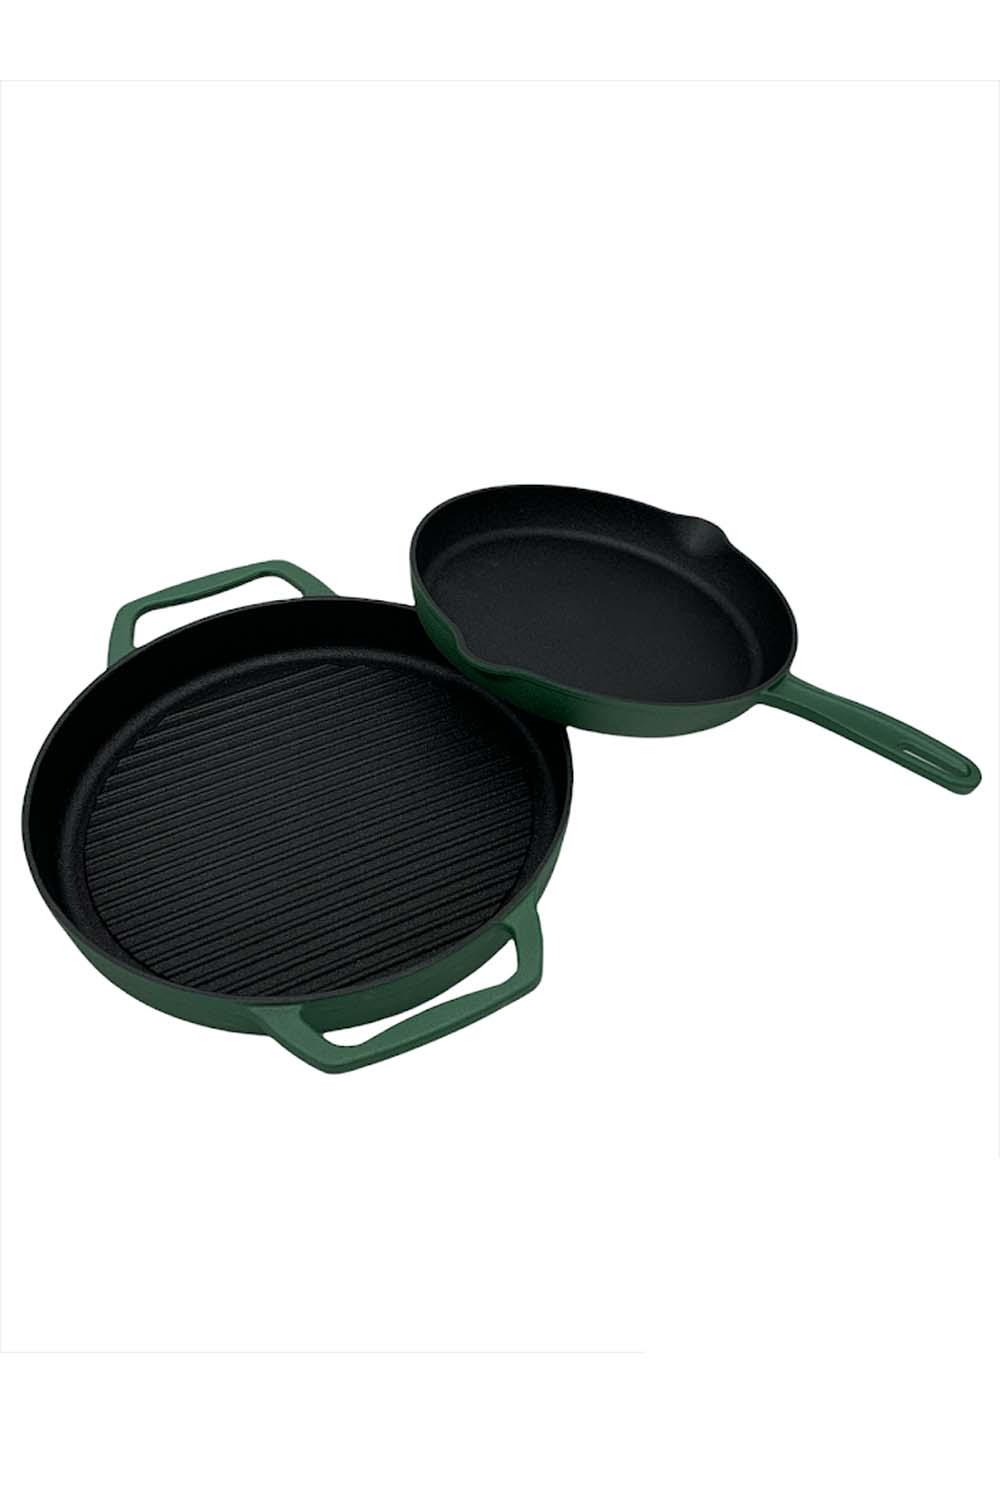 NEW Cook's Essentials Nonstick Square Cast-Iron Grill Pan 